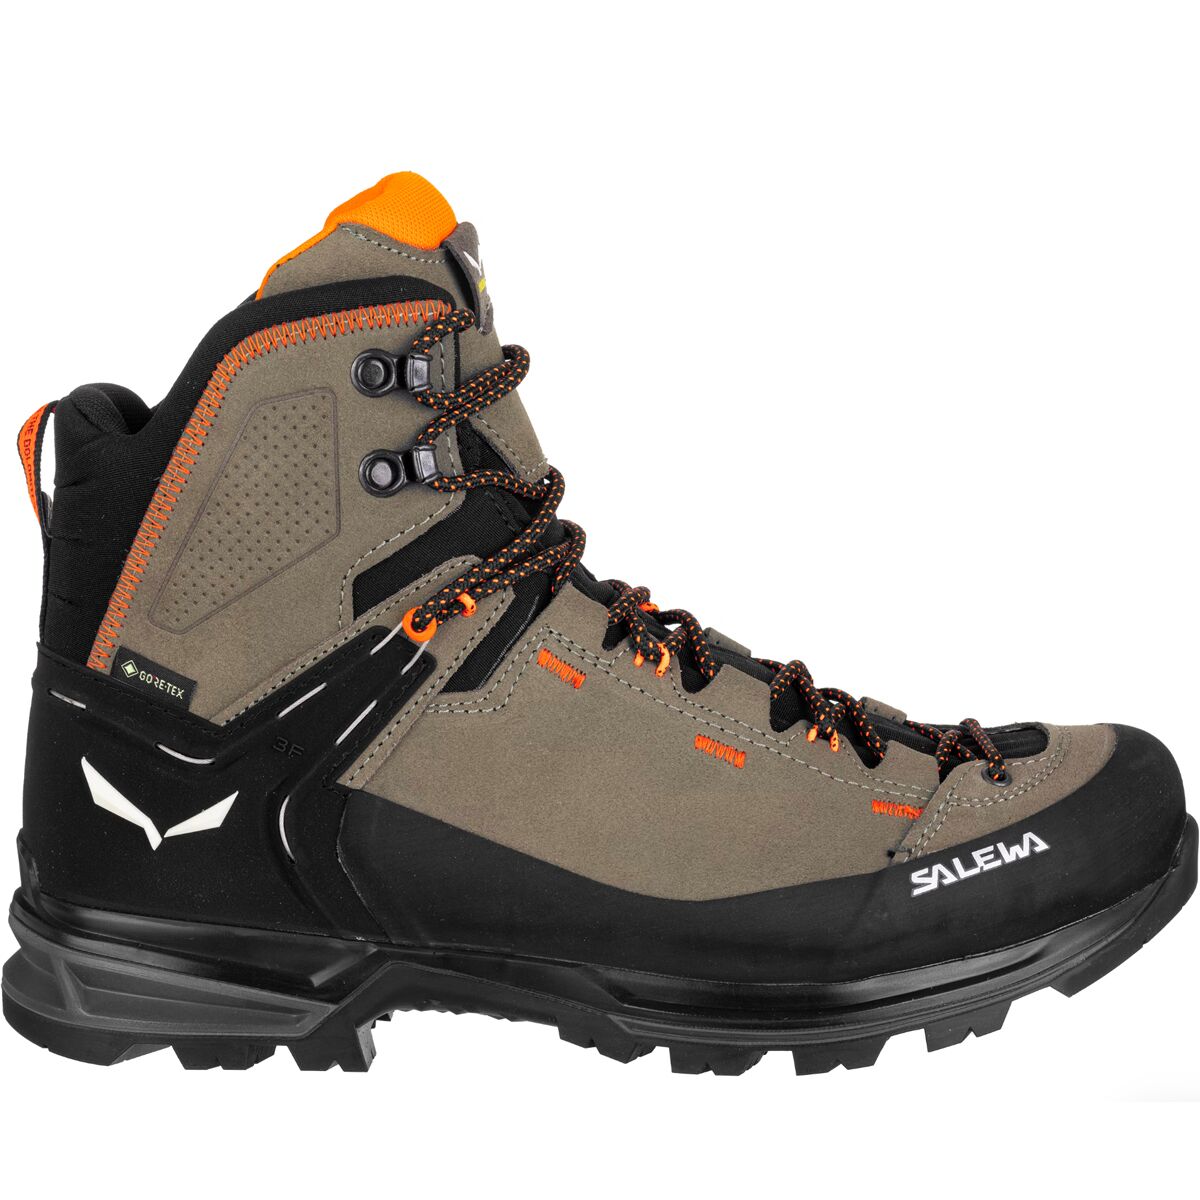 Mountain Trainer 2 Mid GTX Backpacking Boot - Men